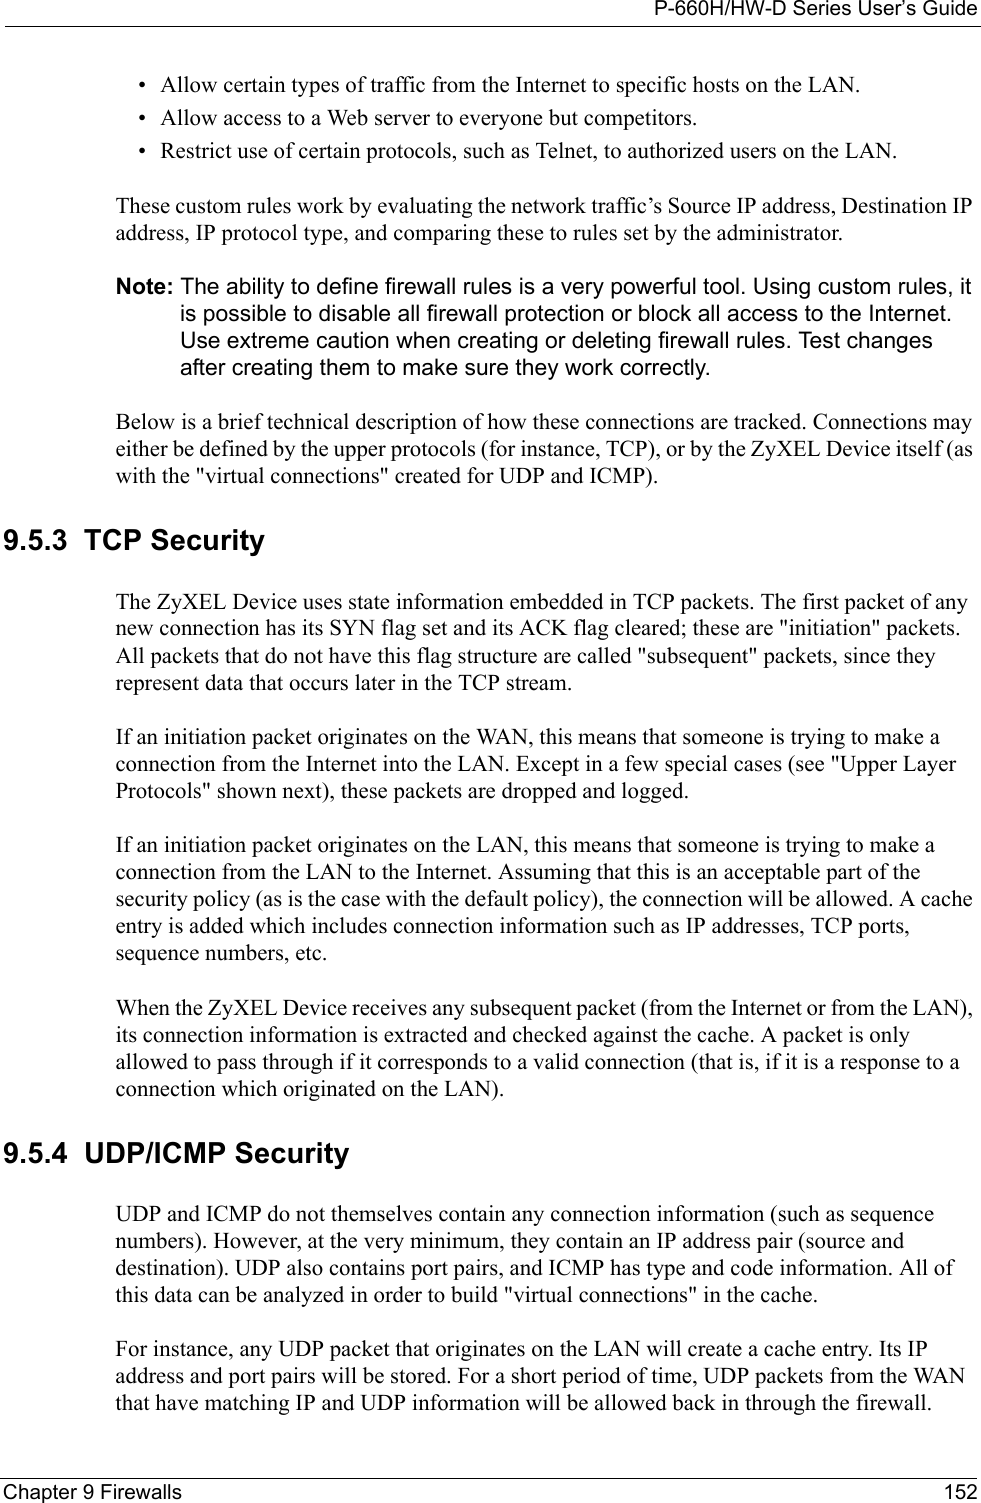 P-660H/HW-D Series User’s GuideChapter 9 Firewalls 152• Allow certain types of traffic from the Internet to specific hosts on the LAN.• Allow access to a Web server to everyone but competitors.• Restrict use of certain protocols, such as Telnet, to authorized users on the LAN.These custom rules work by evaluating the network traffic’s Source IP address, Destination IP address, IP protocol type, and comparing these to rules set by the administrator.Note: The ability to define firewall rules is a very powerful tool. Using custom rules, it is possible to disable all firewall protection or block all access to the Internet. Use extreme caution when creating or deleting firewall rules. Test changes after creating them to make sure they work correctly.Below is a brief technical description of how these connections are tracked. Connections may either be defined by the upper protocols (for instance, TCP), or by the ZyXEL Device itself (as with the &quot;virtual connections&quot; created for UDP and ICMP). 9.5.3  TCP SecurityThe ZyXEL Device uses state information embedded in TCP packets. The first packet of any new connection has its SYN flag set and its ACK flag cleared; these are &quot;initiation&quot; packets. All packets that do not have this flag structure are called &quot;subsequent&quot; packets, since they represent data that occurs later in the TCP stream. If an initiation packet originates on the WAN, this means that someone is trying to make a connection from the Internet into the LAN. Except in a few special cases (see &quot;Upper Layer Protocols&quot; shown next), these packets are dropped and logged.If an initiation packet originates on the LAN, this means that someone is trying to make a connection from the LAN to the Internet. Assuming that this is an acceptable part of the security policy (as is the case with the default policy), the connection will be allowed. A cache entry is added which includes connection information such as IP addresses, TCP ports, sequence numbers, etc.When the ZyXEL Device receives any subsequent packet (from the Internet or from the LAN), its connection information is extracted and checked against the cache. A packet is only allowed to pass through if it corresponds to a valid connection (that is, if it is a response to a connection which originated on the LAN).9.5.4  UDP/ICMP SecurityUDP and ICMP do not themselves contain any connection information (such as sequence numbers). However, at the very minimum, they contain an IP address pair (source and destination). UDP also contains port pairs, and ICMP has type and code information. All of this data can be analyzed in order to build &quot;virtual connections&quot; in the cache. For instance, any UDP packet that originates on the LAN will create a cache entry. Its IP address and port pairs will be stored. For a short period of time, UDP packets from the WAN that have matching IP and UDP information will be allowed back in through the firewall.